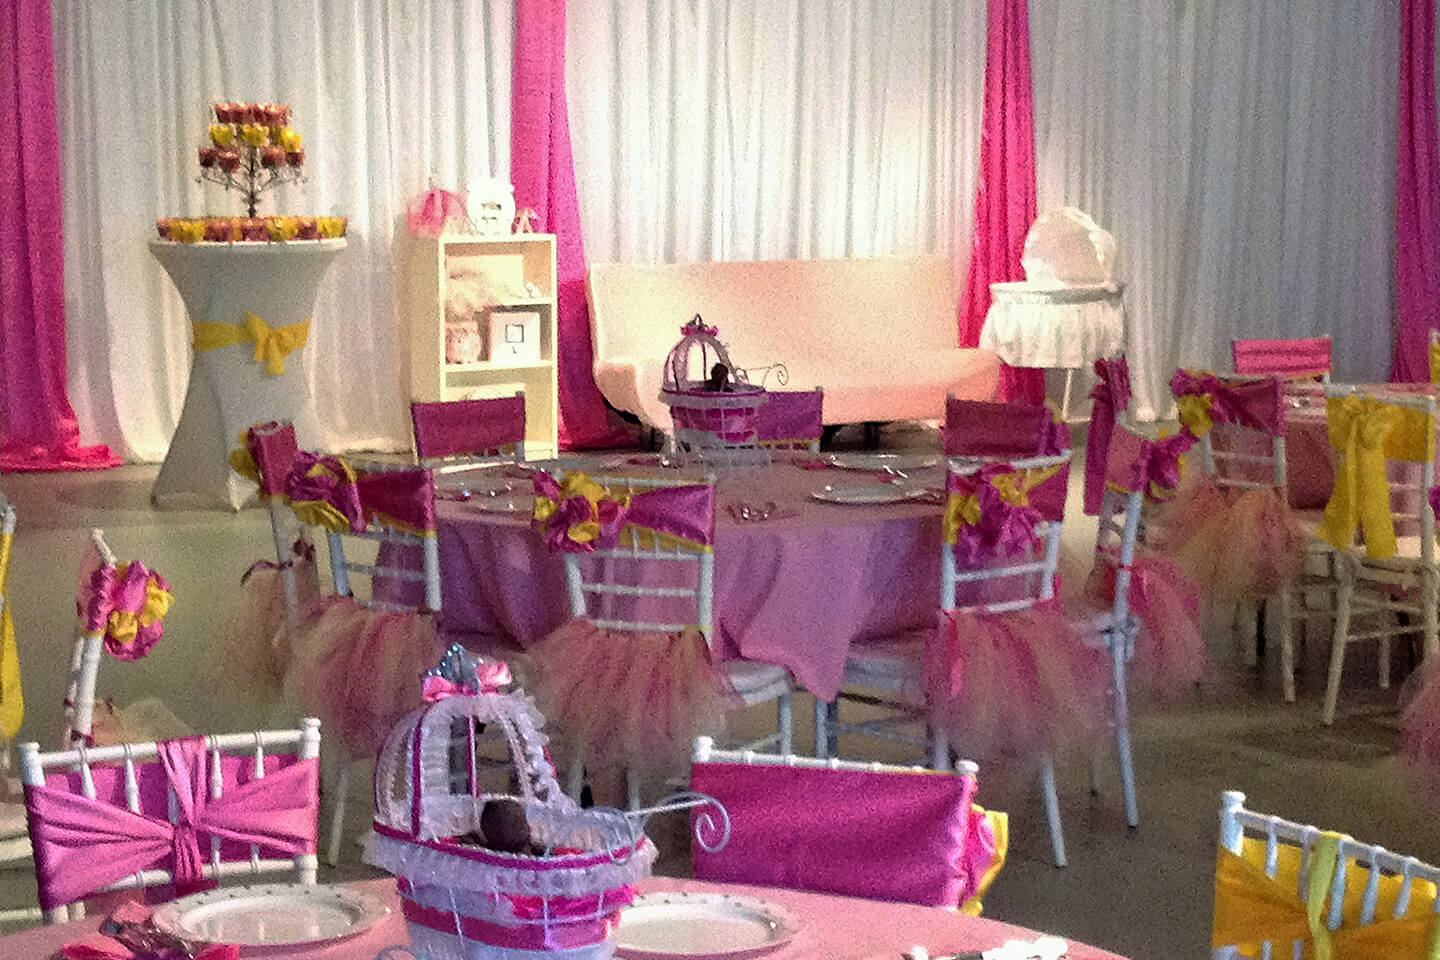 A table set up with pink and white chairs.